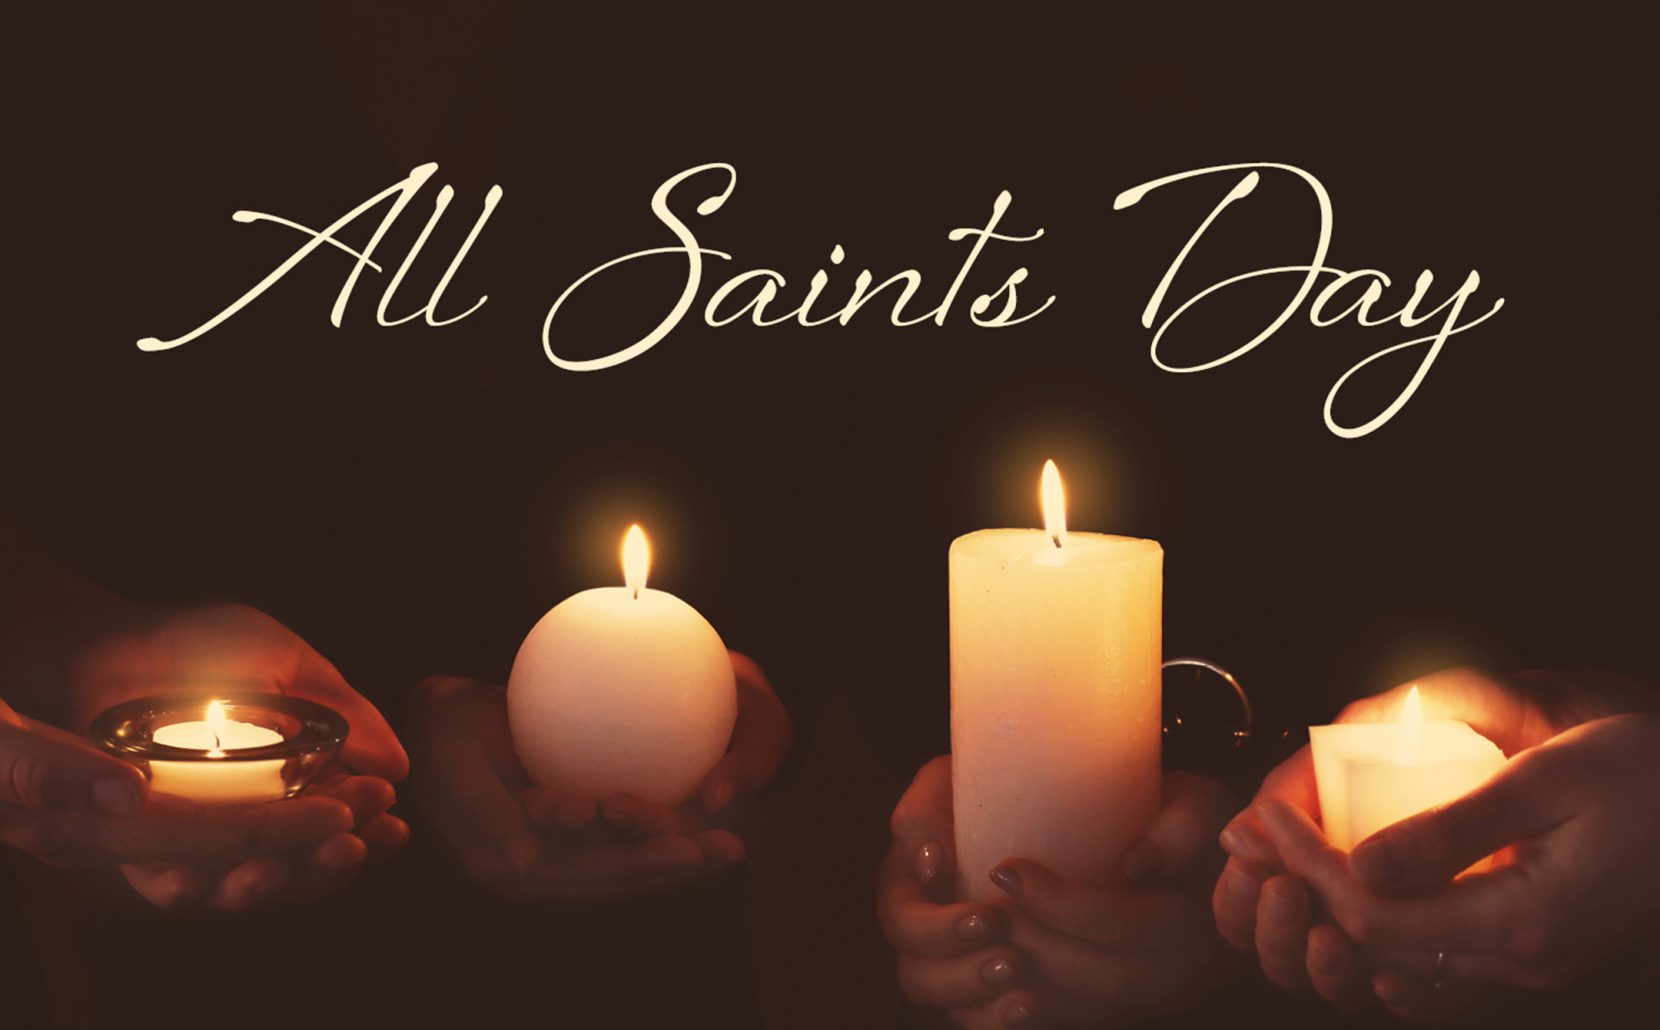 All Saints Day Church of the Incarnation